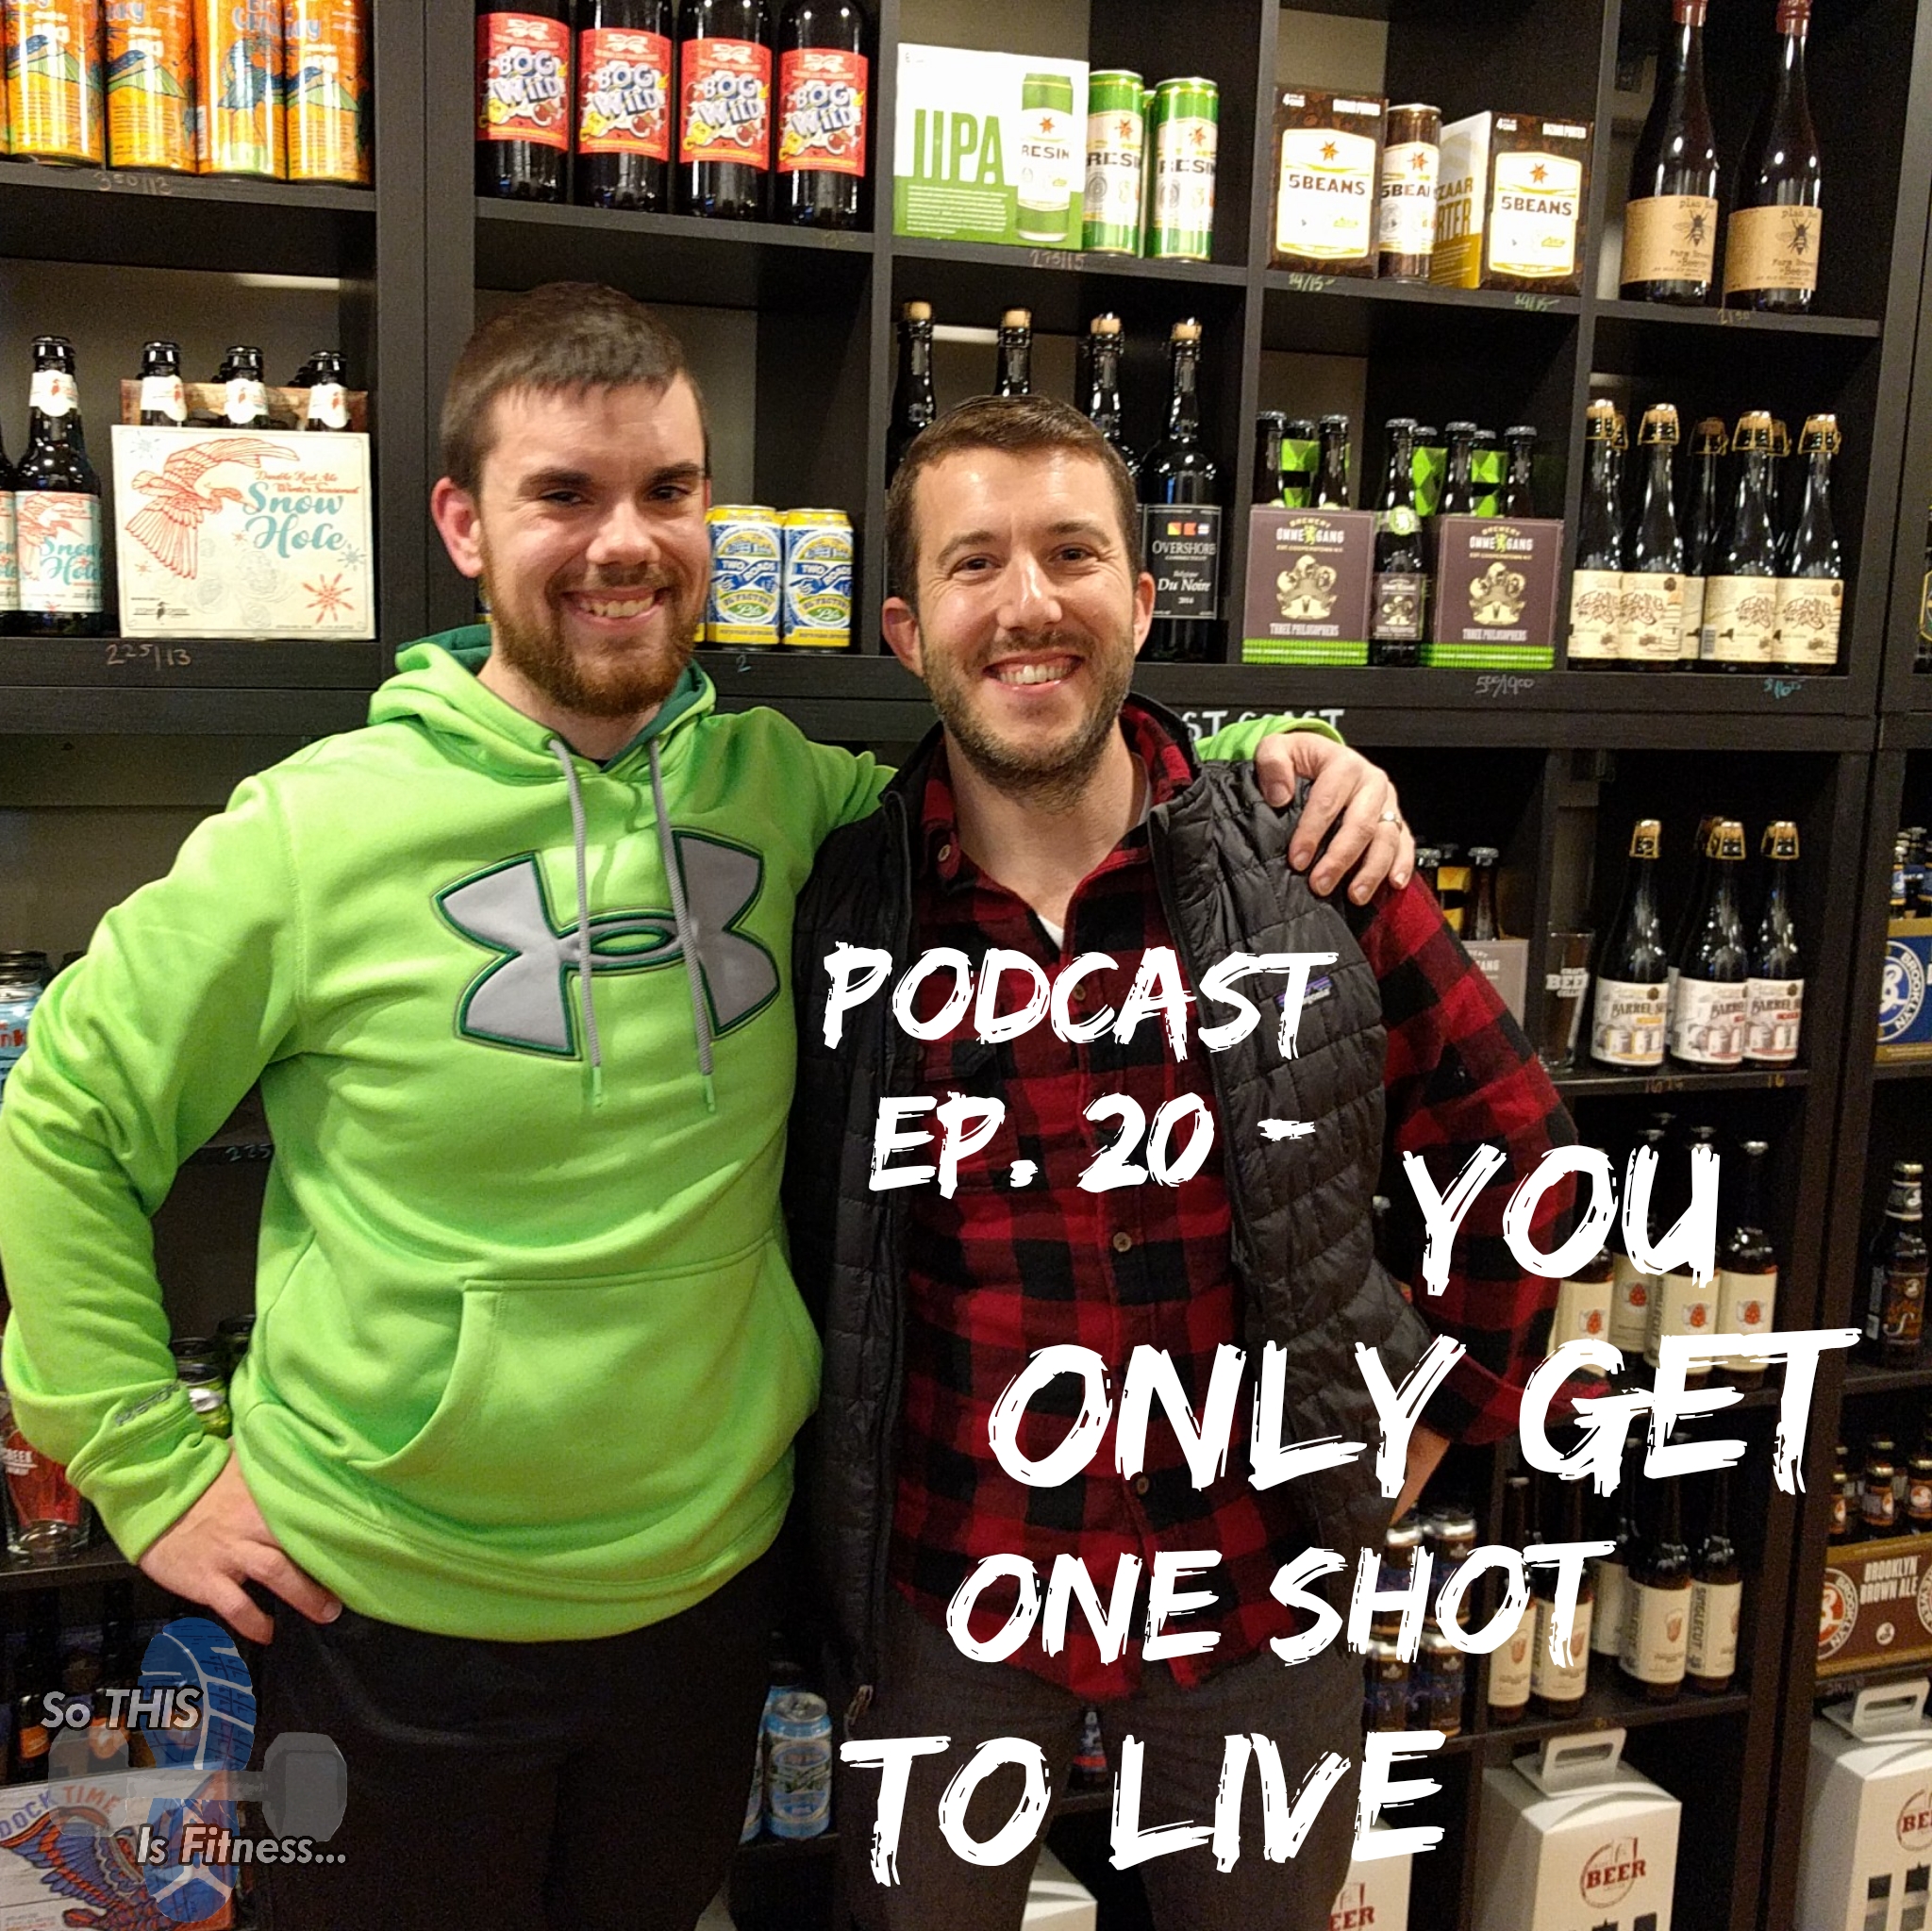 #20 – We All Only Get One Shot To Live